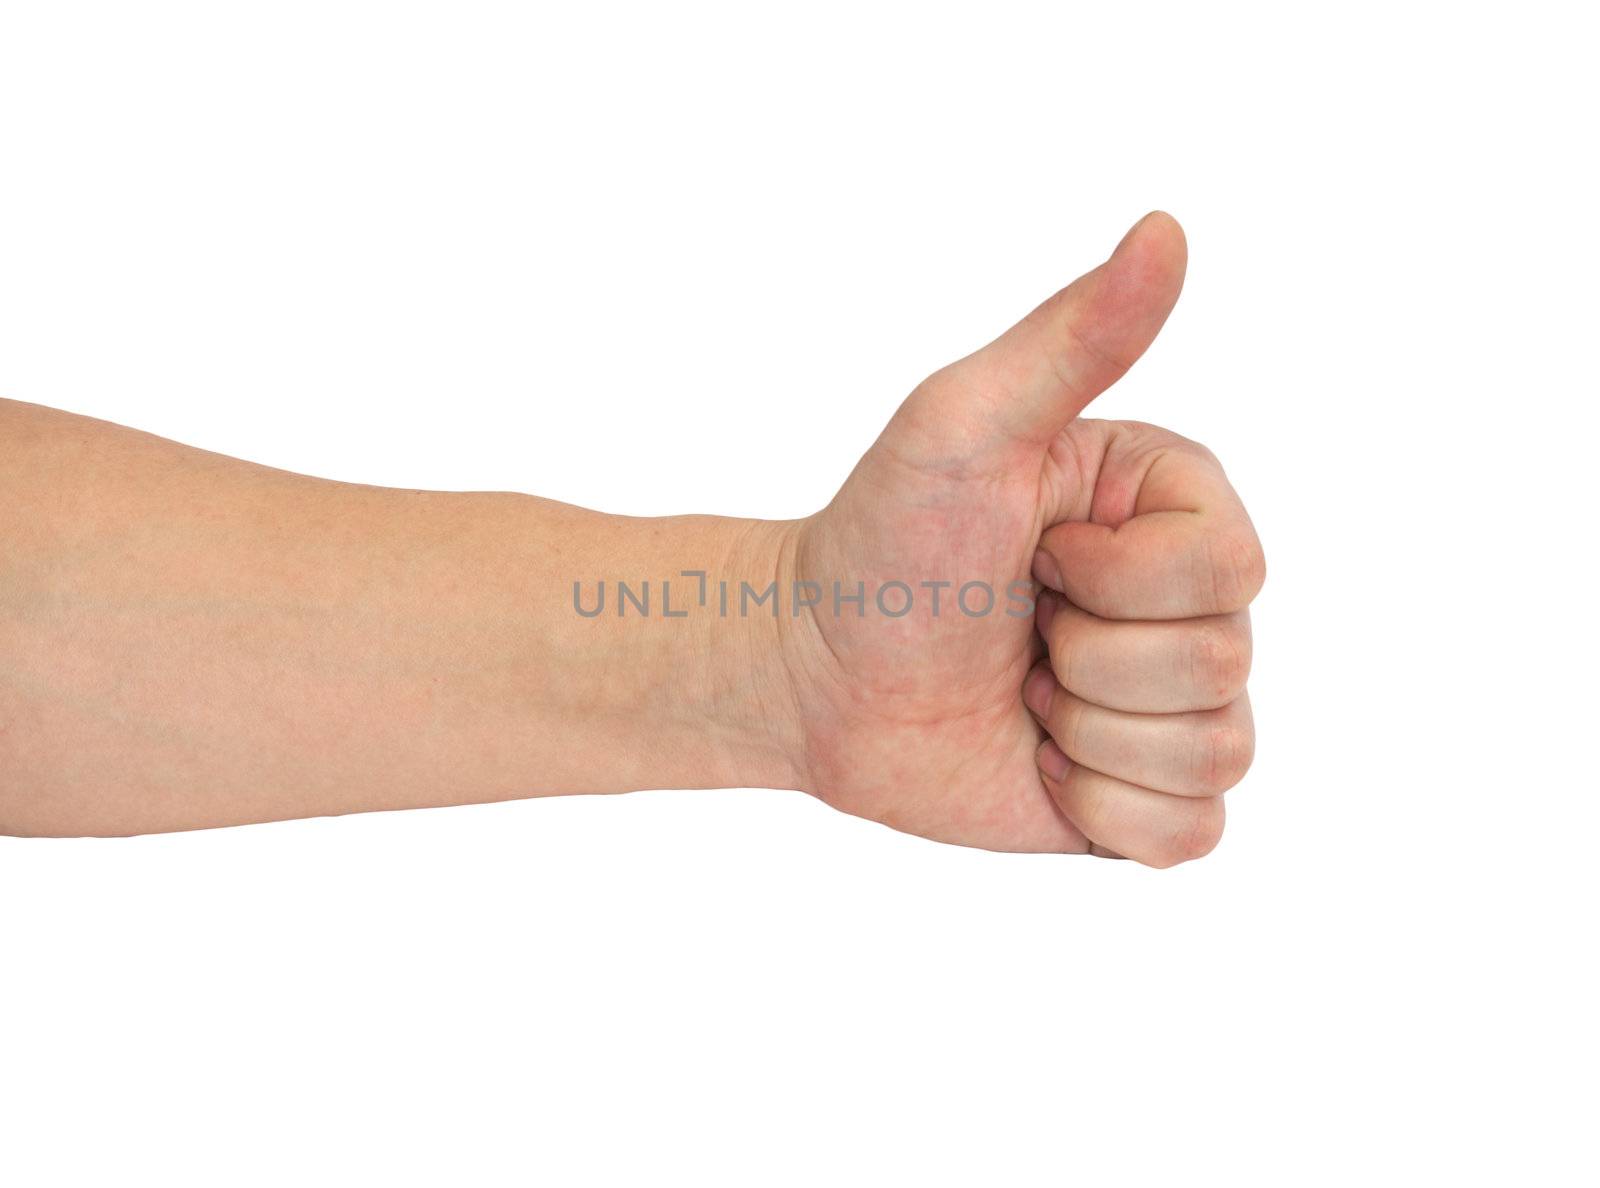 The man's hand is isolated on a white background 